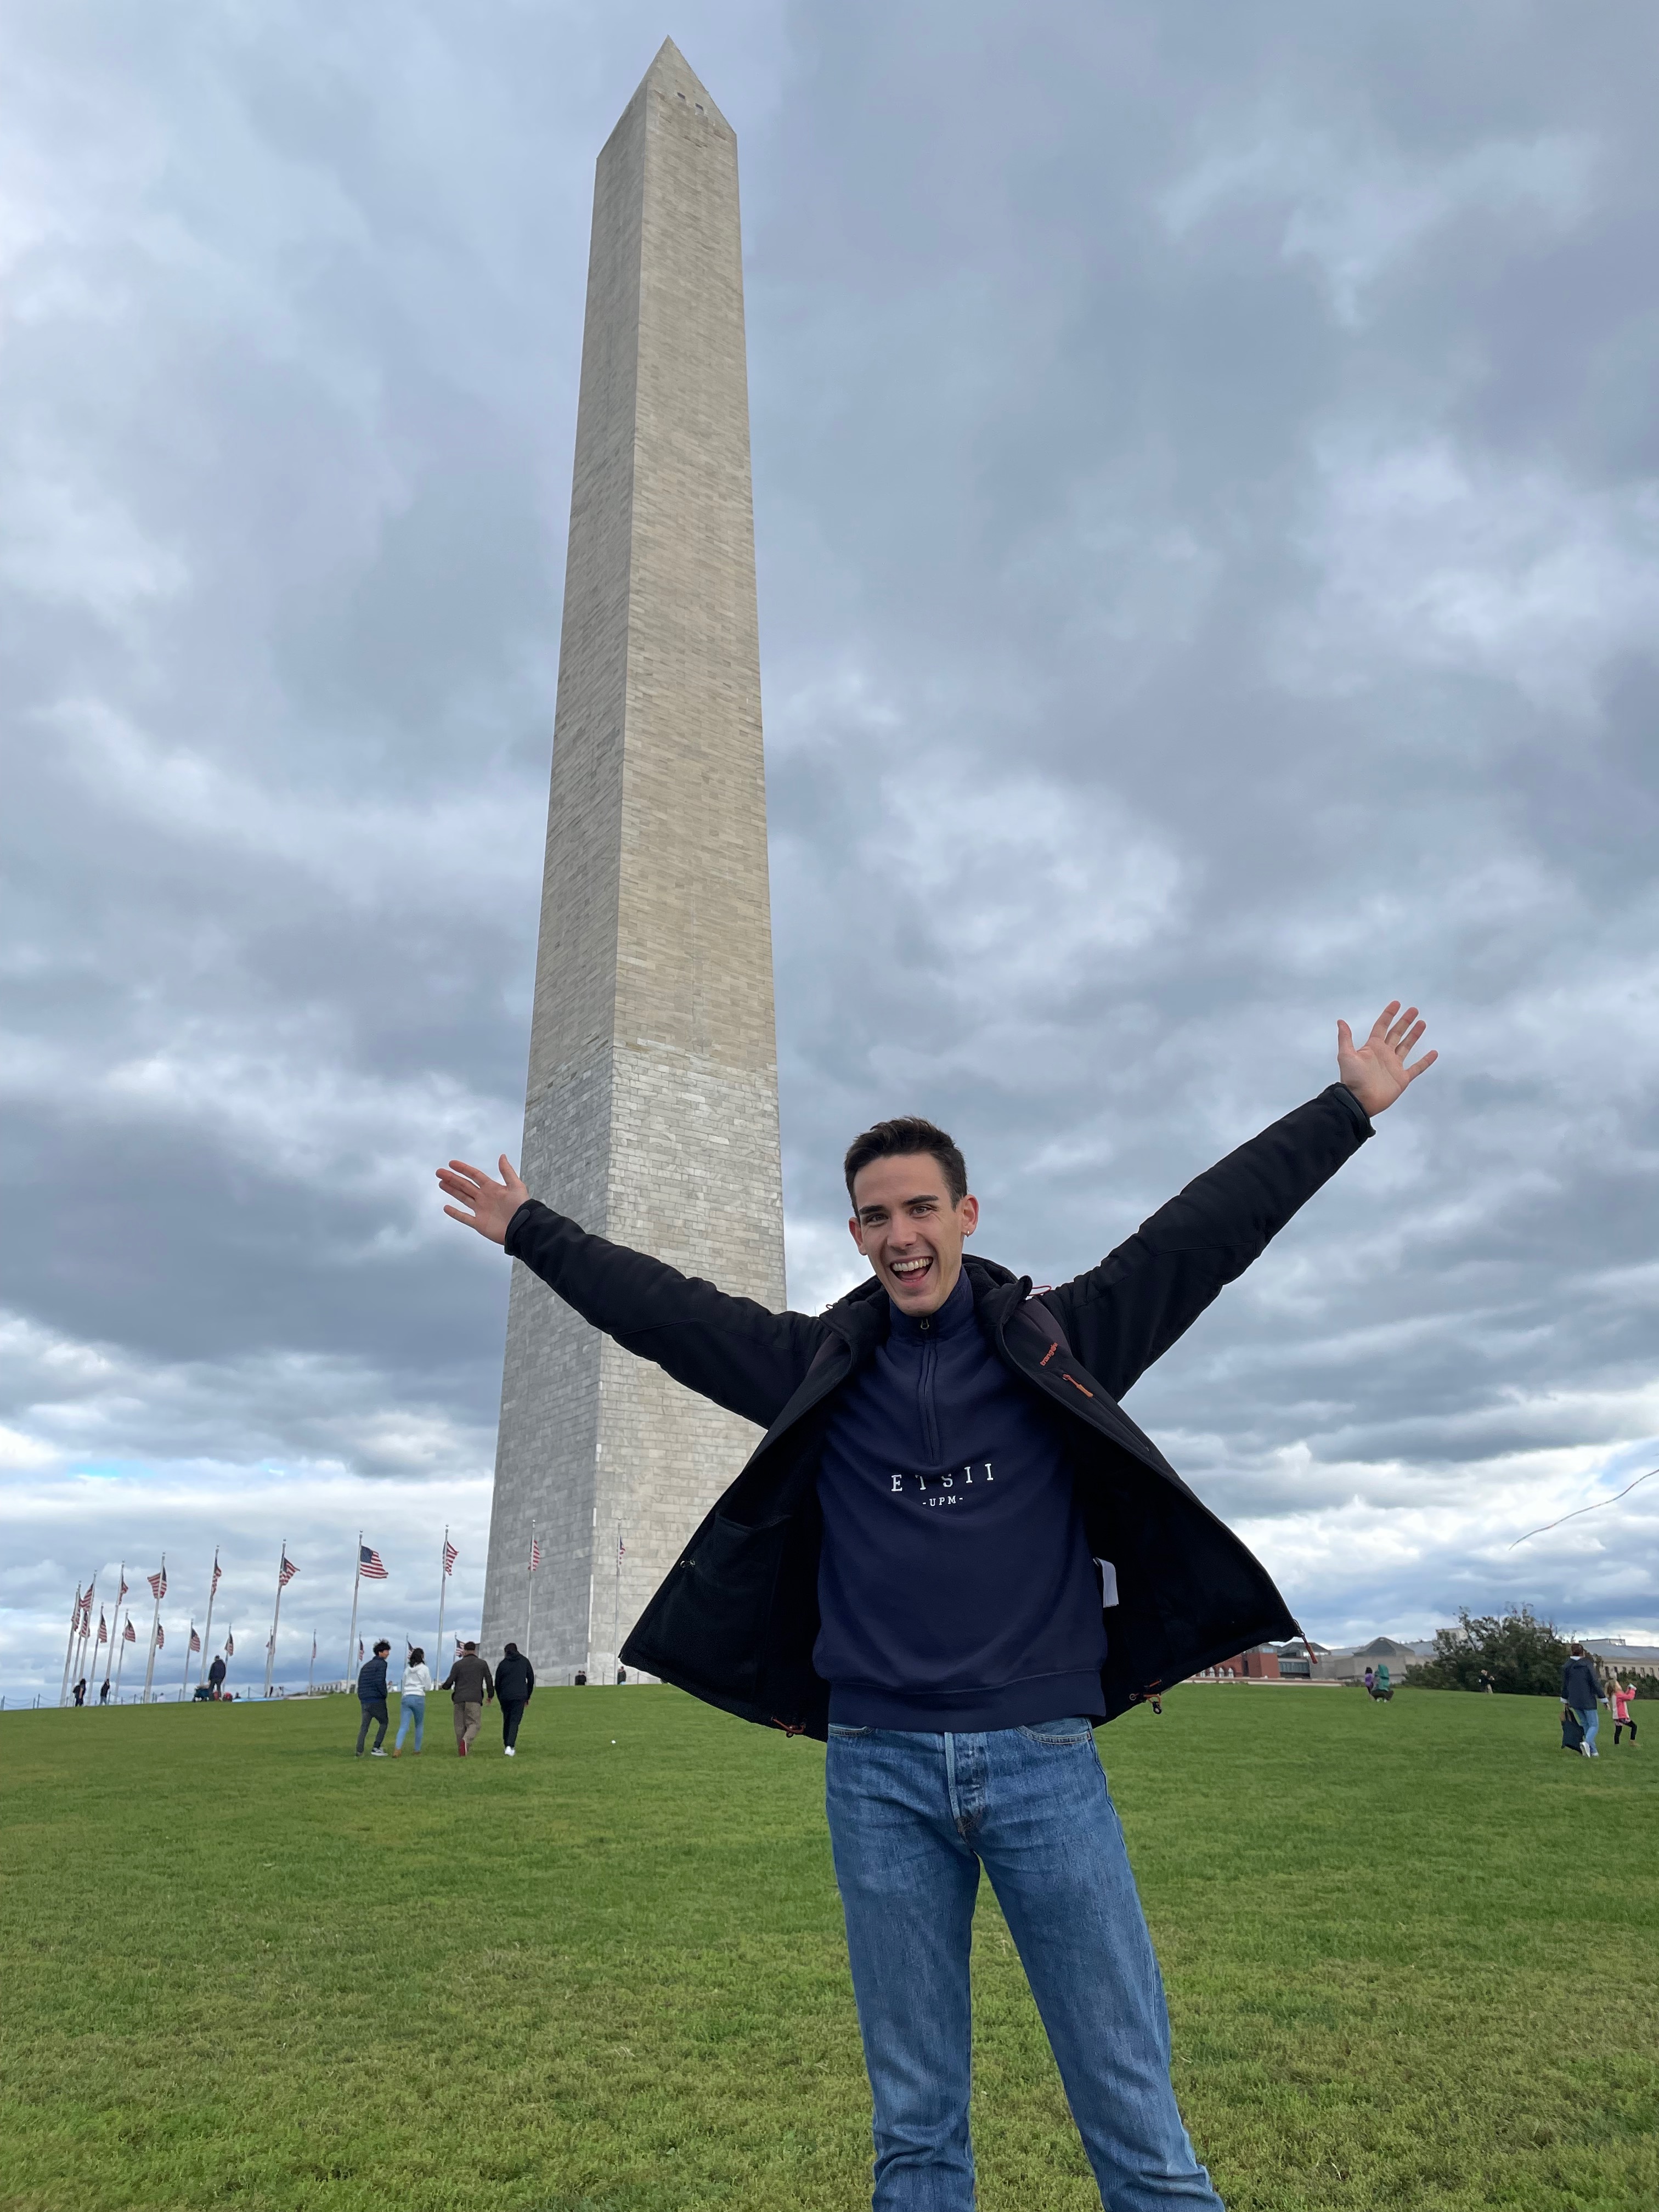 Victor Soria standing with arms raised, in front of the Washington Monument